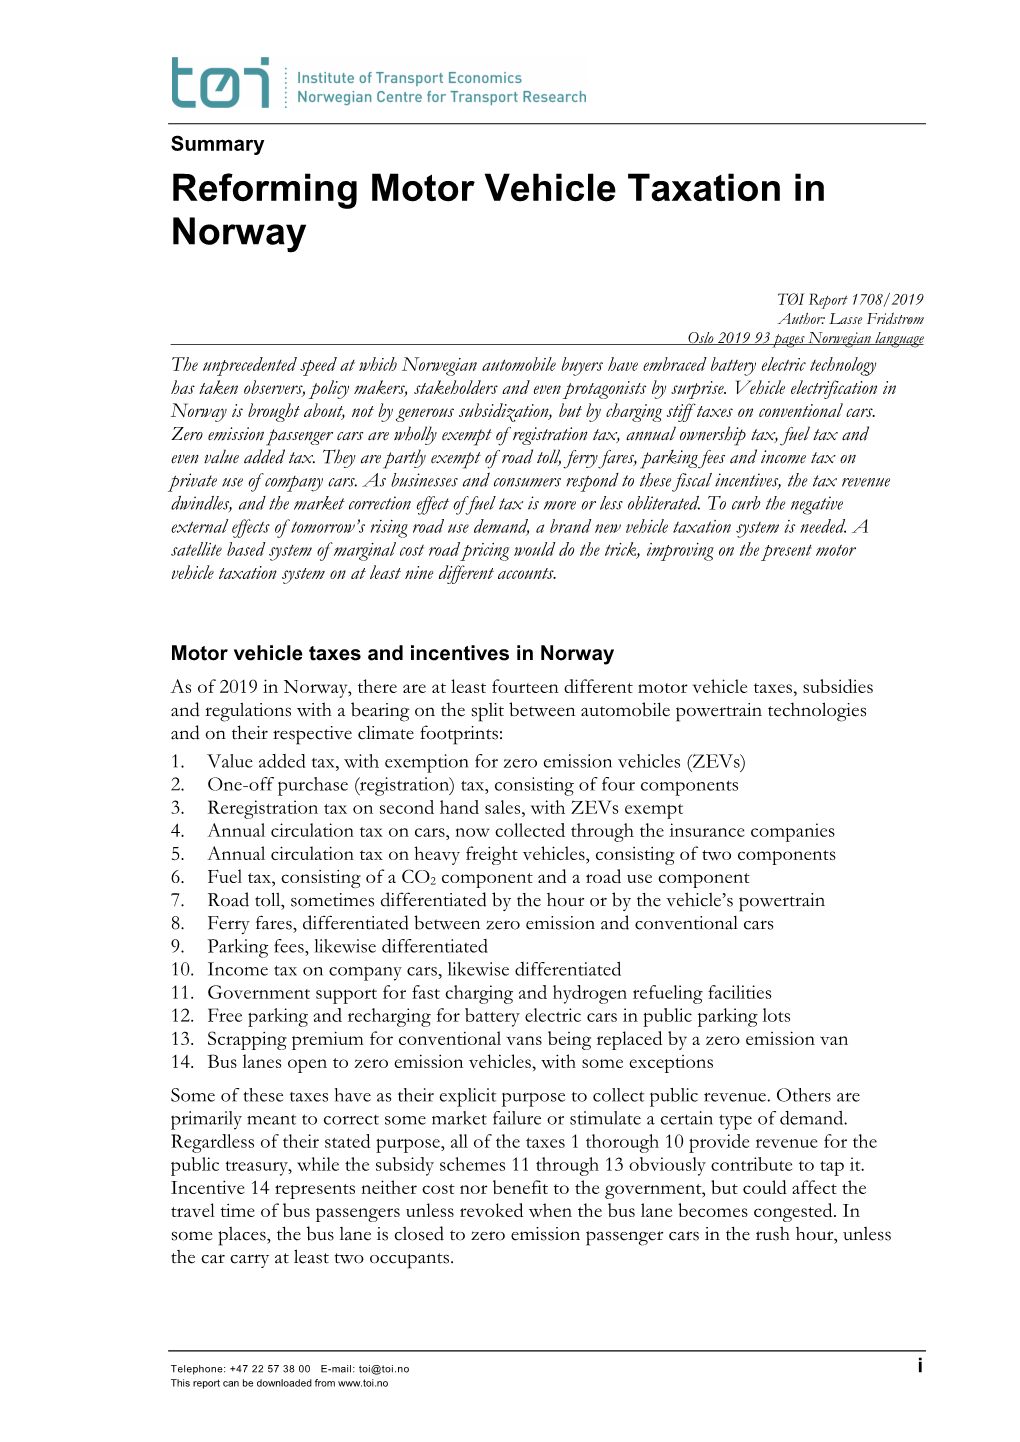 Reforming Motor Vehicle Taxation in Norway